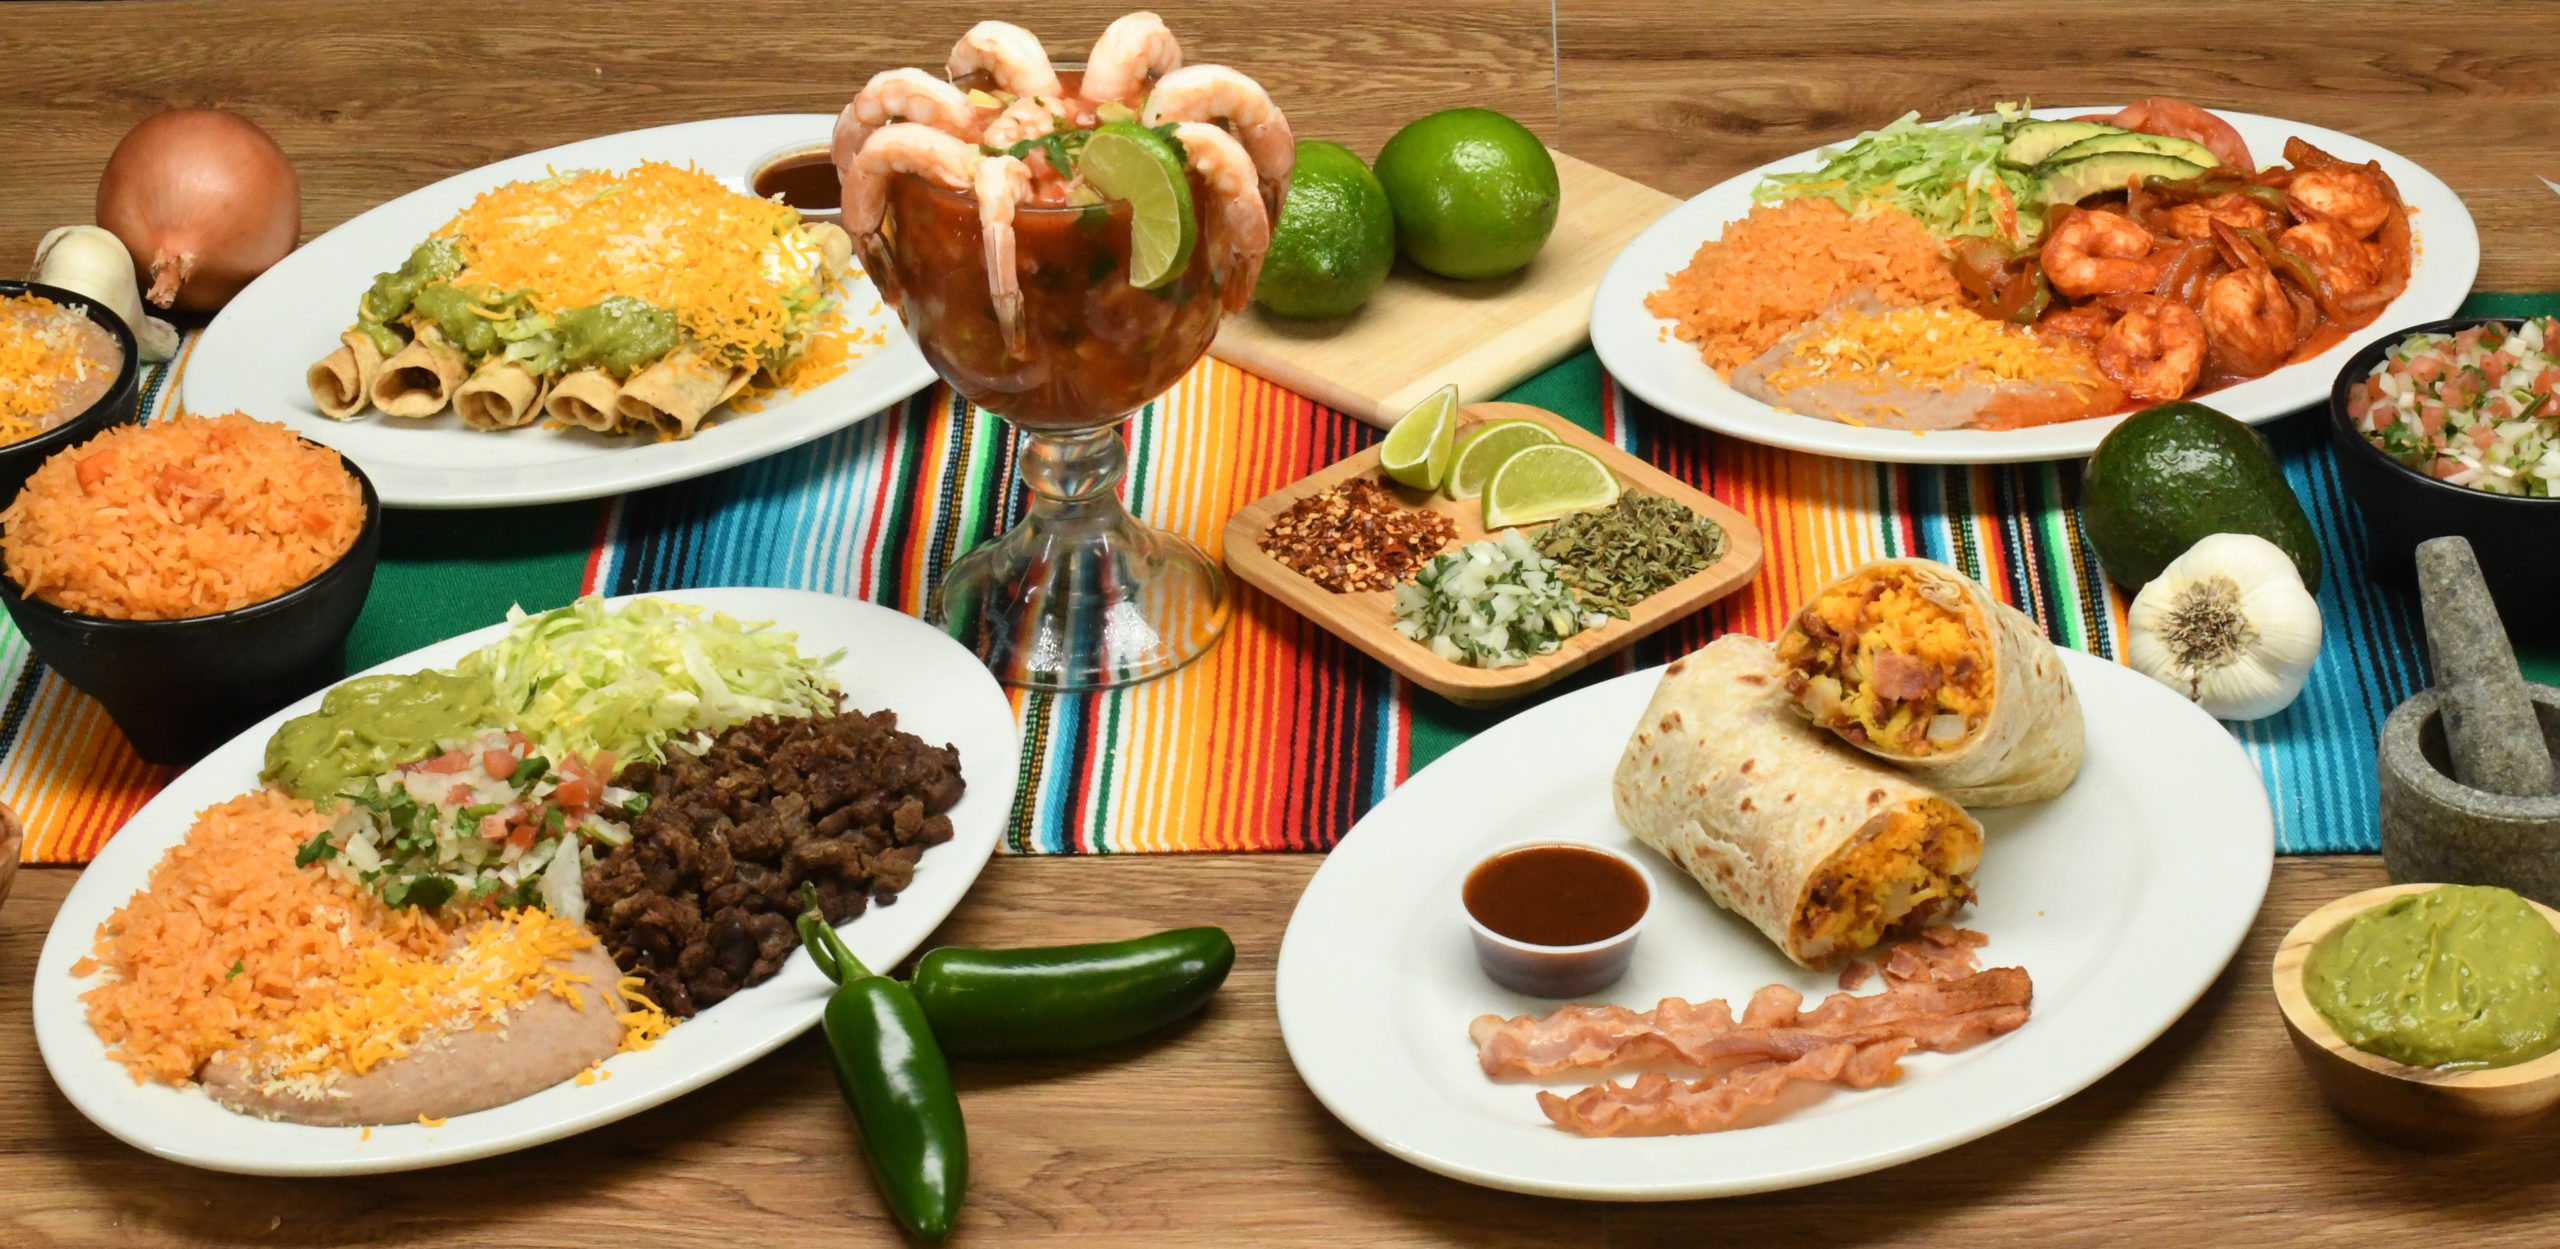 Table setting with several plates filled with Roberto's Taco Shop combos, entrees, and appetizers